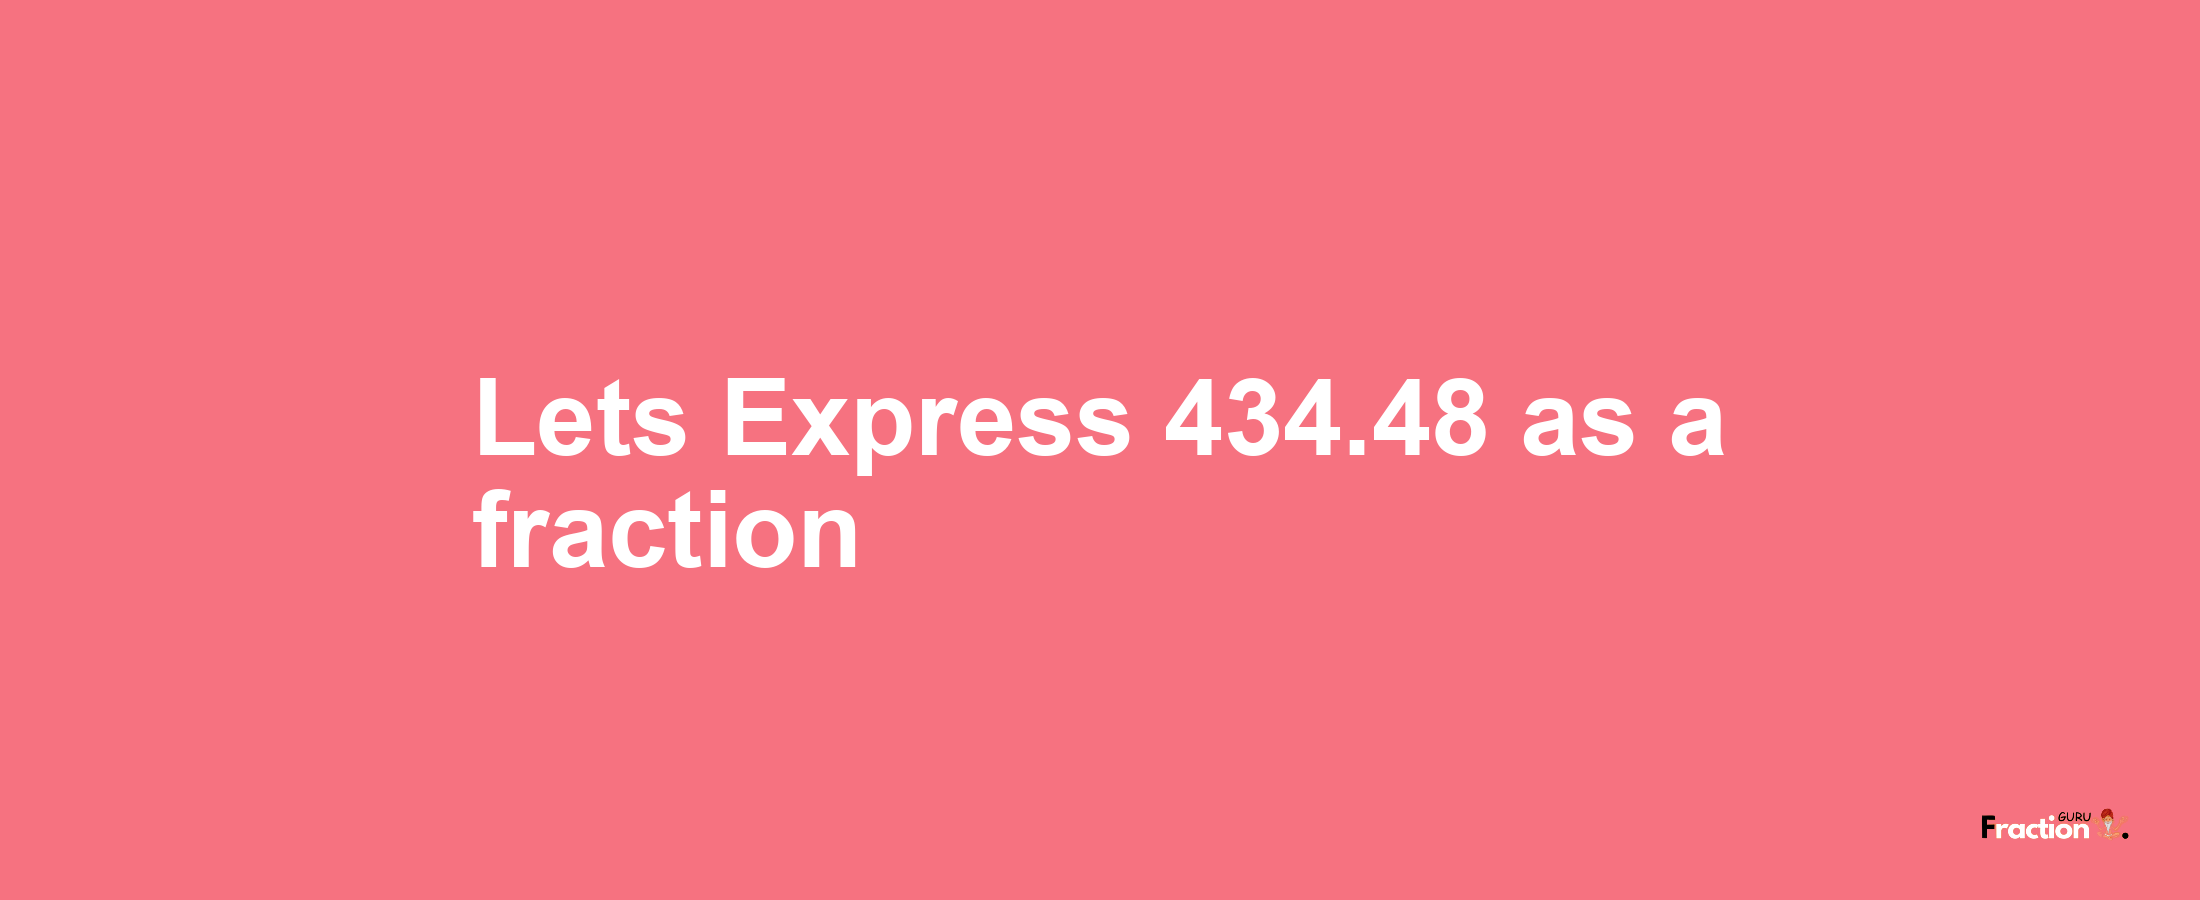 Lets Express 434.48 as afraction